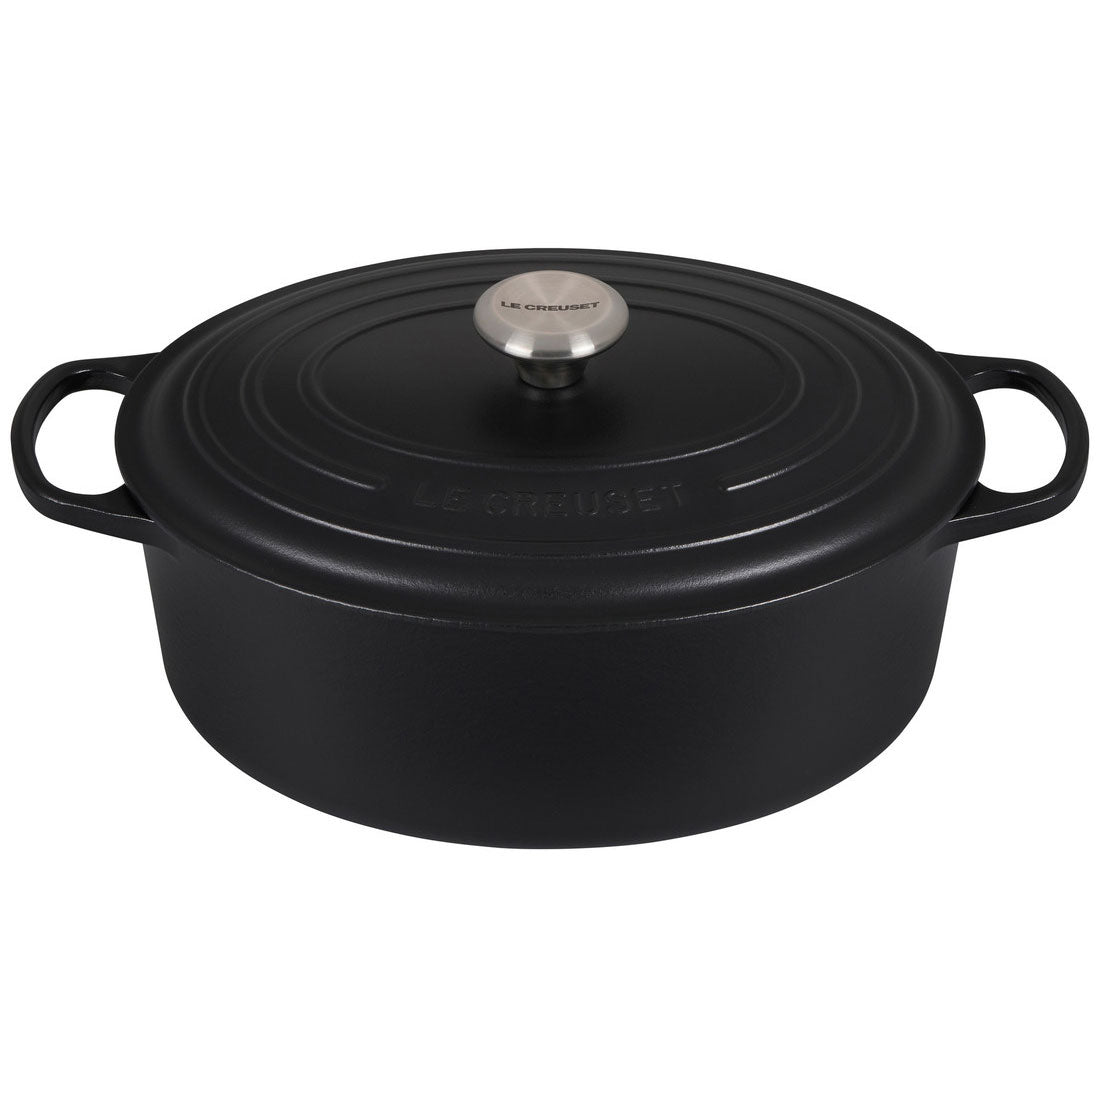  Le Creuset Enameled Cast Iron Giant Reversible Grill/Griddle,  10 x 18.5, Licorice: Home & Kitchen